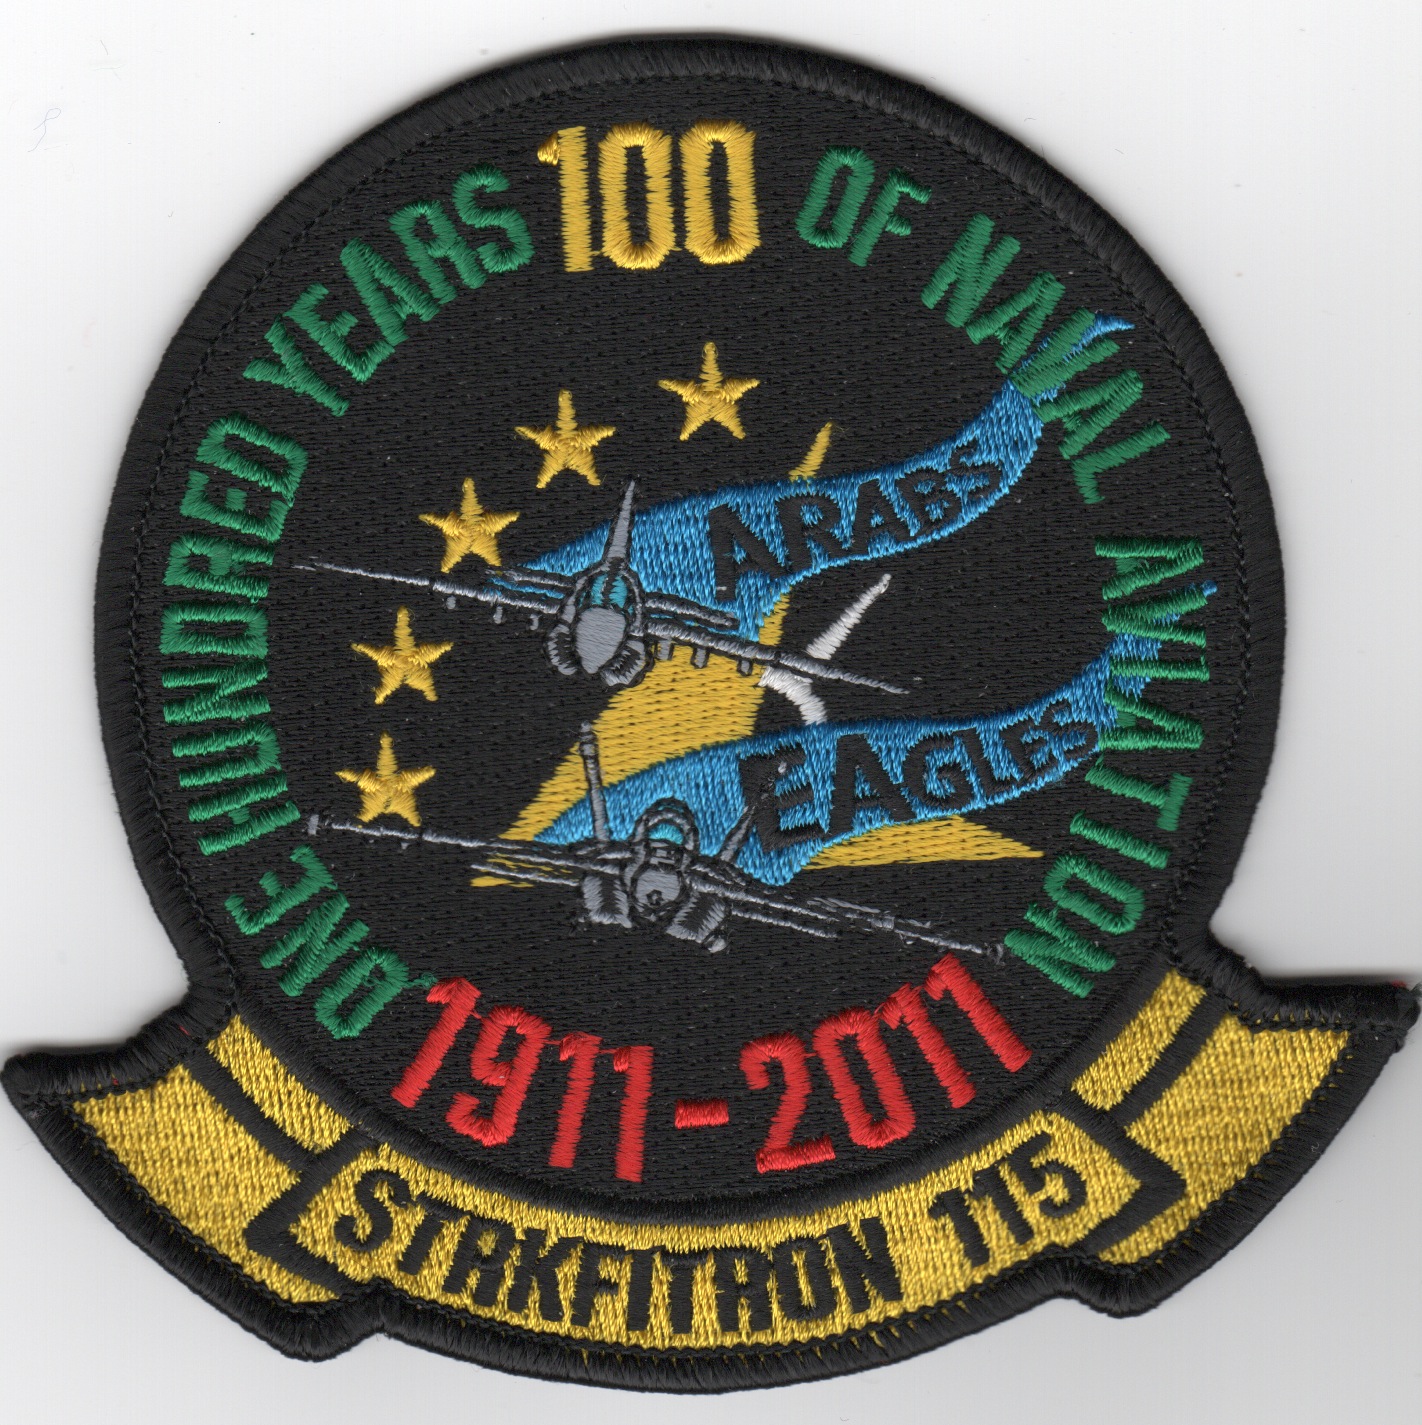 VFA-115 '1911-2011 100 Year' Anniversary Patch